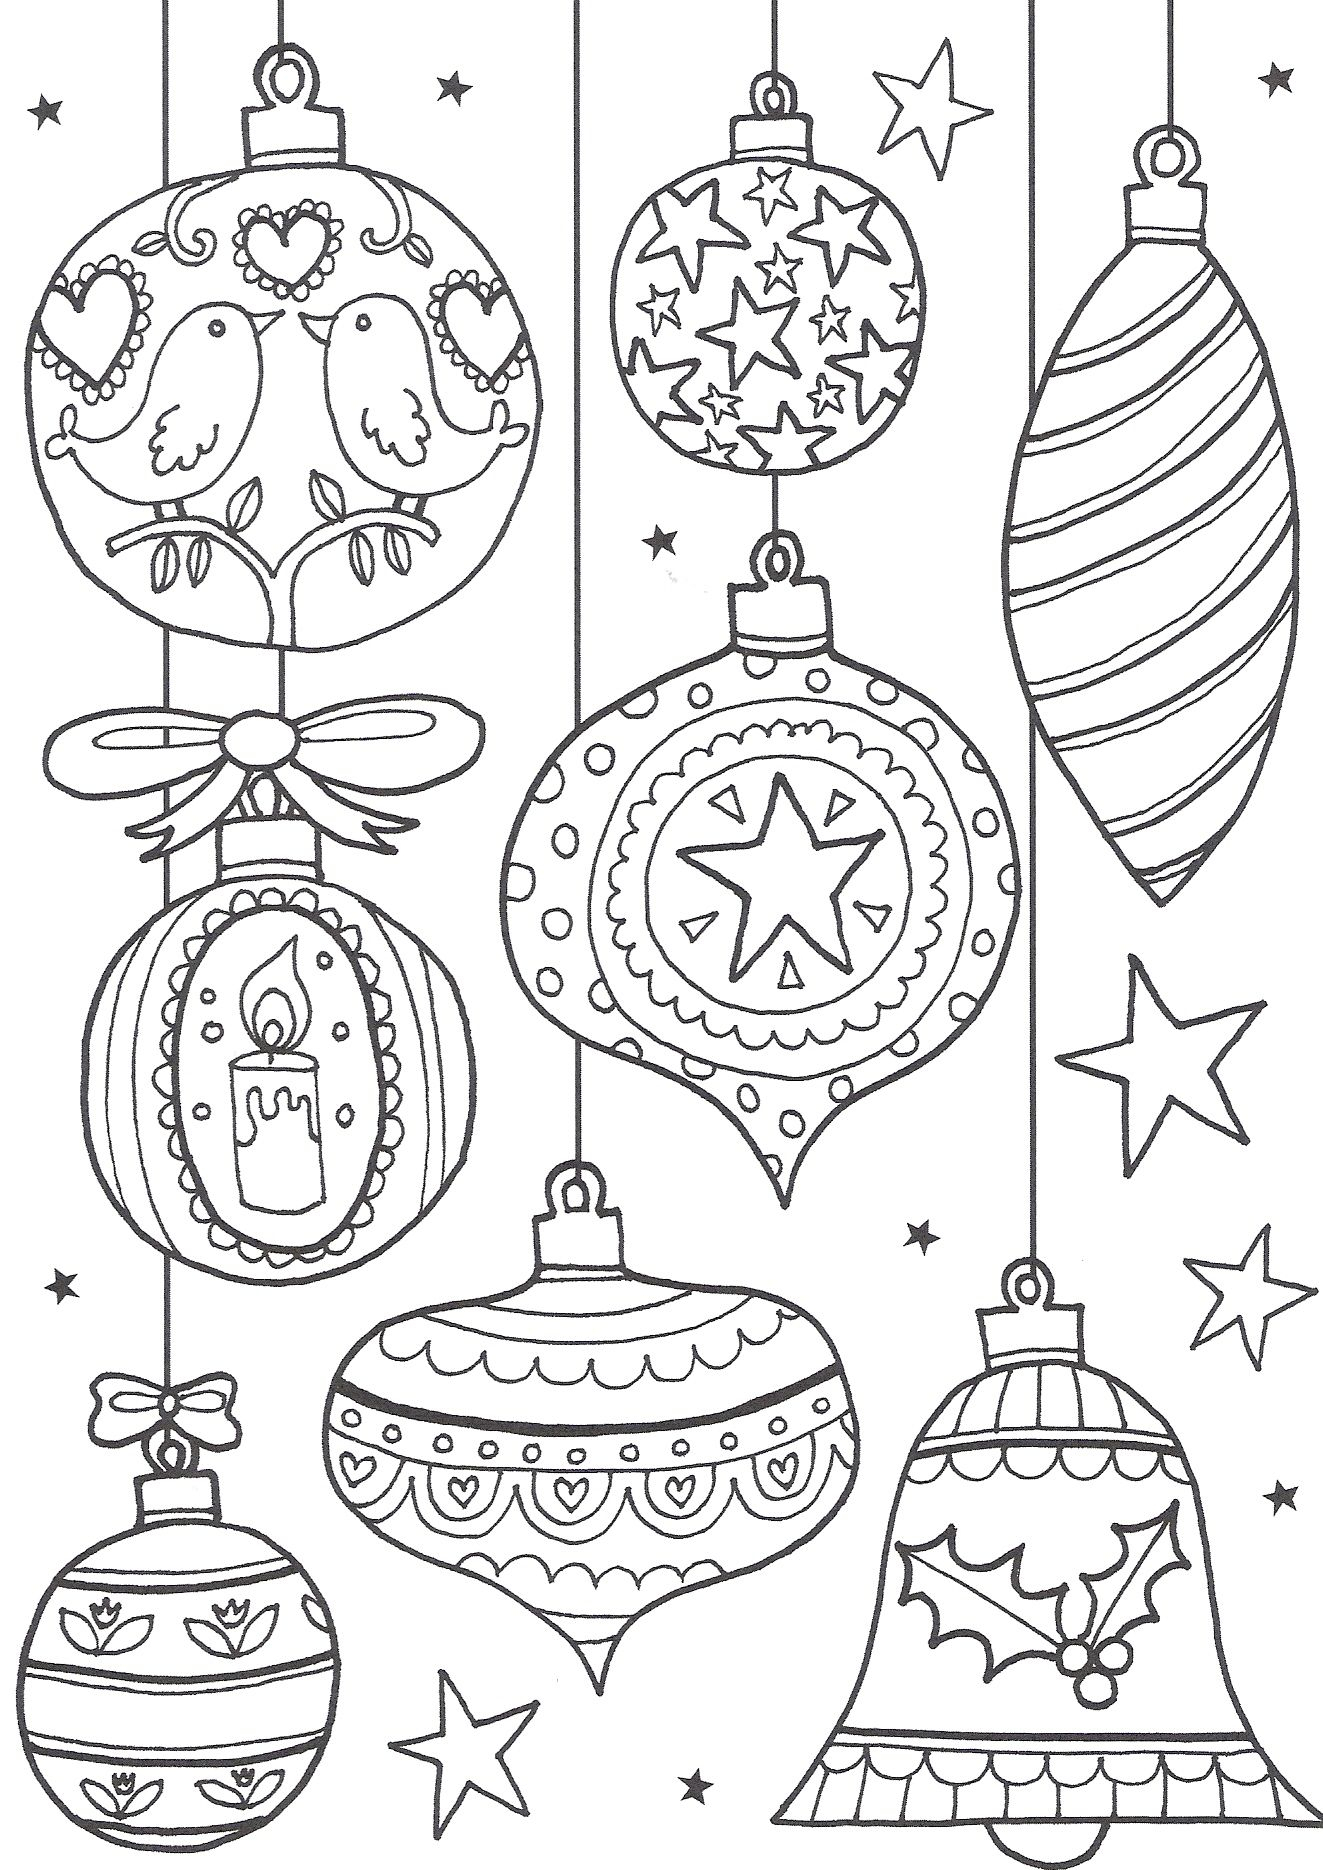 Free Christmas Colouring Pages For Adults – The Ultimate Roundup - Free Printable Christmas Coloring Pages For Kids